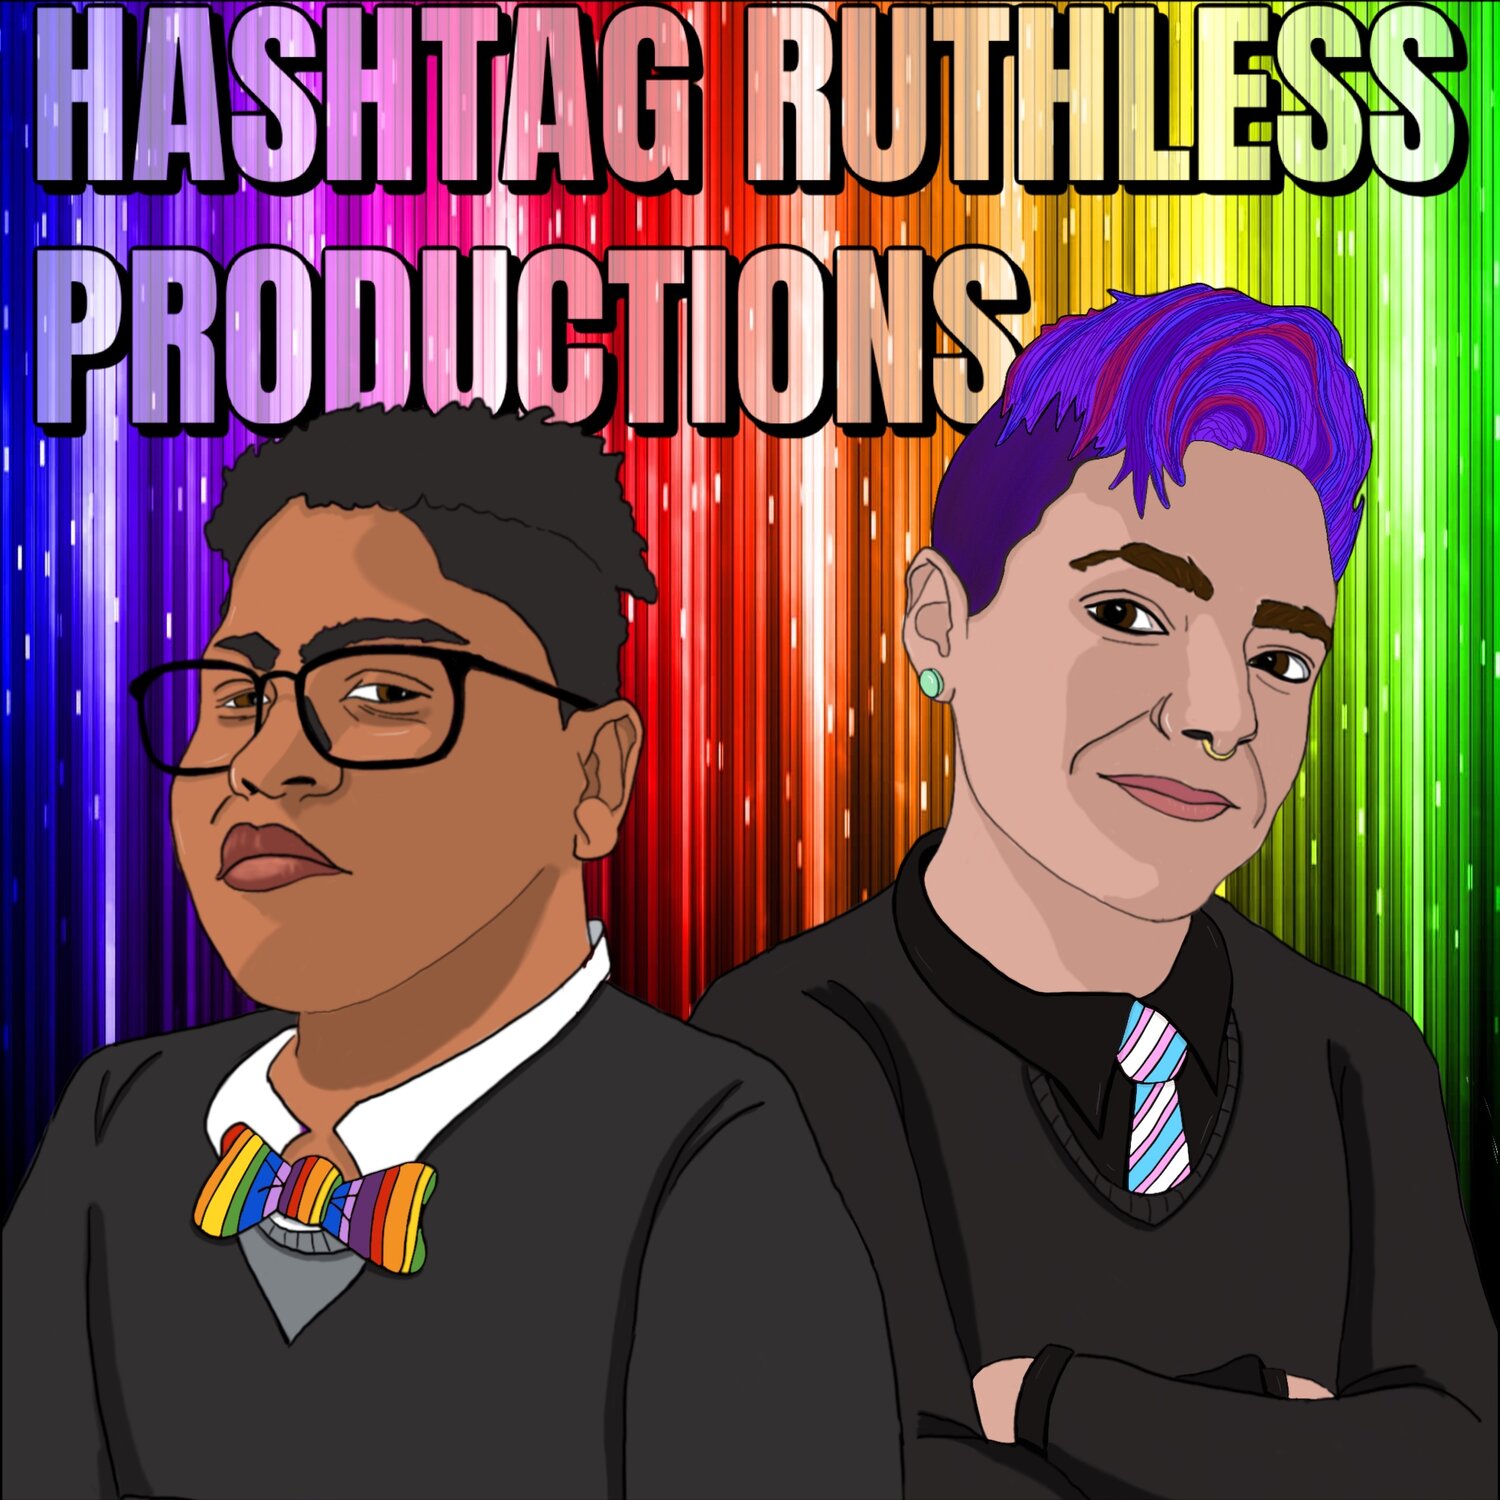 We Are The Gayers transcripts — Hashtag Ruthless Productions